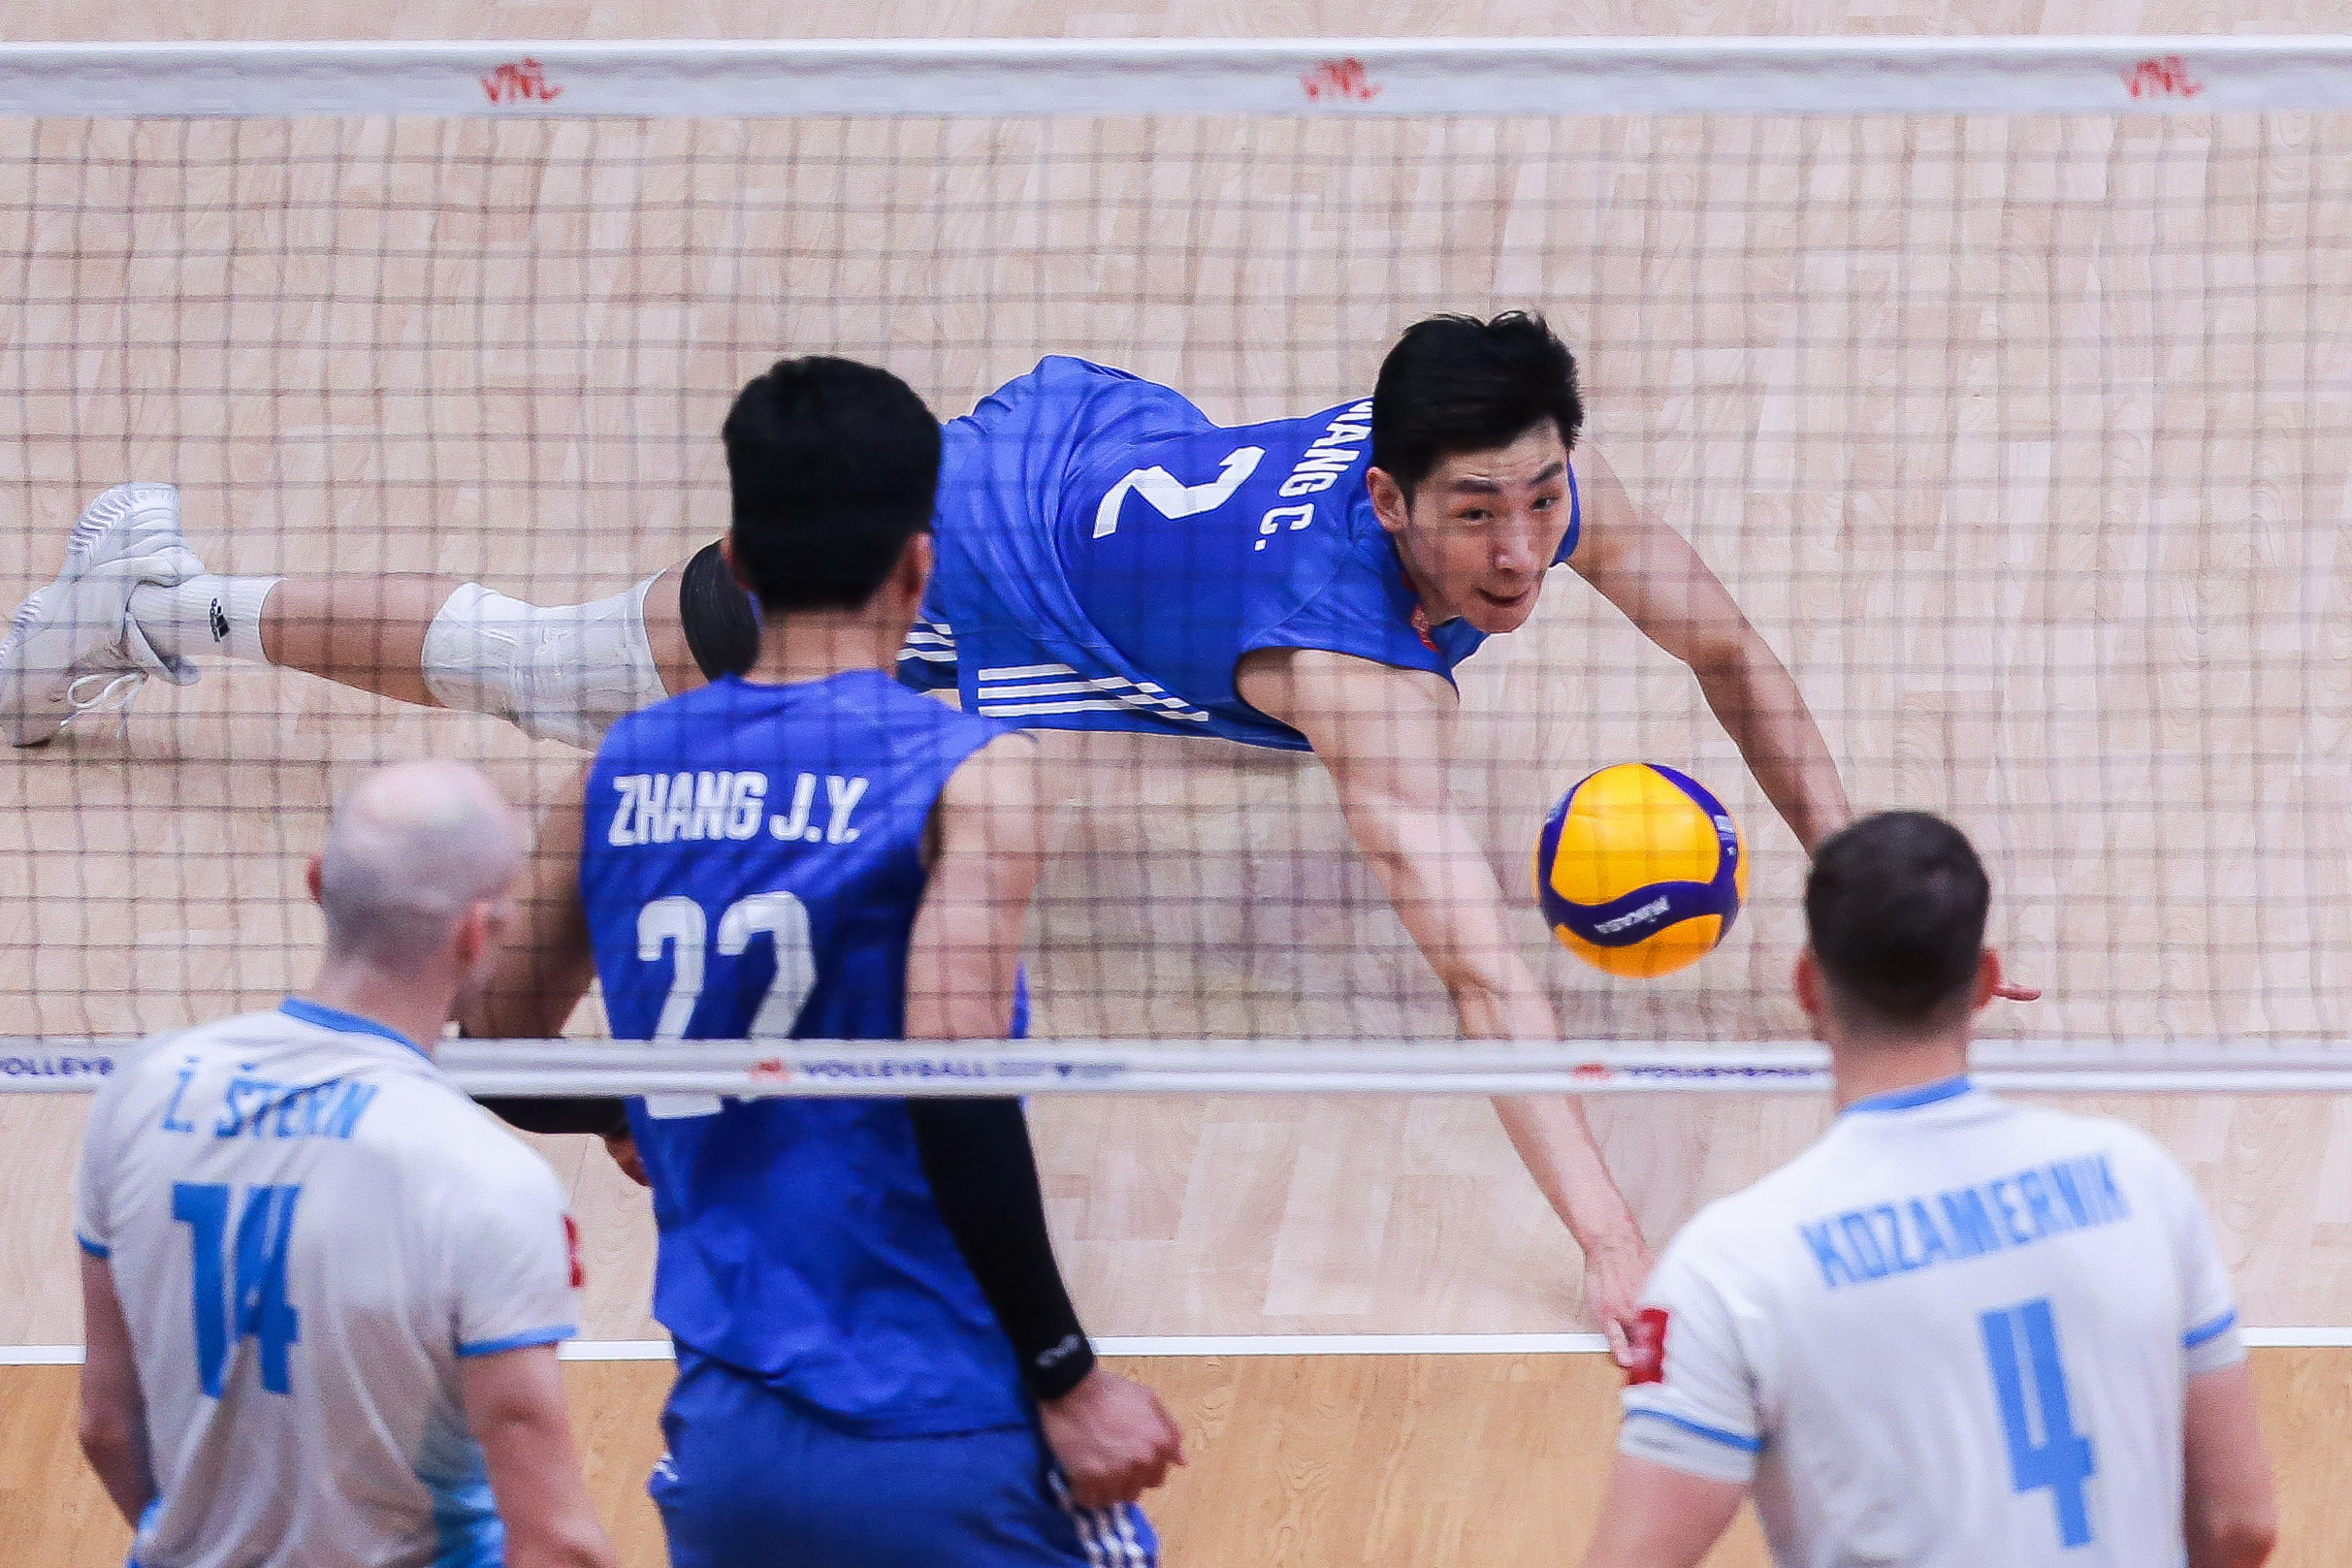 Jiang Chuan of China dives for the ball against Slovenia at the Men’s Volleyball Nations League in Pasay City, the Philippines. Photo: Xinhua